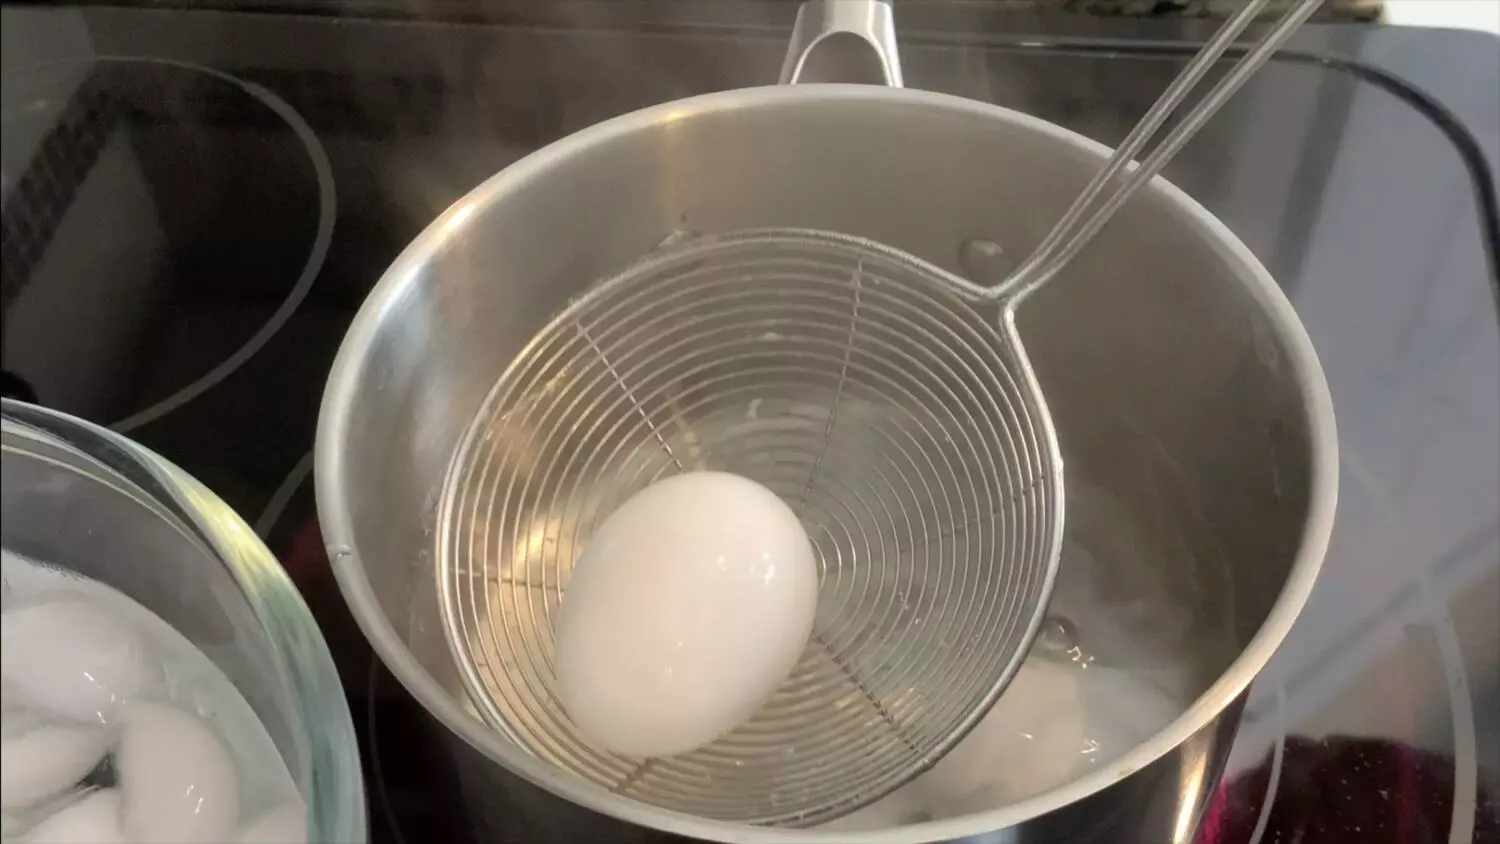 Remove egg from boiling water and add to ice.